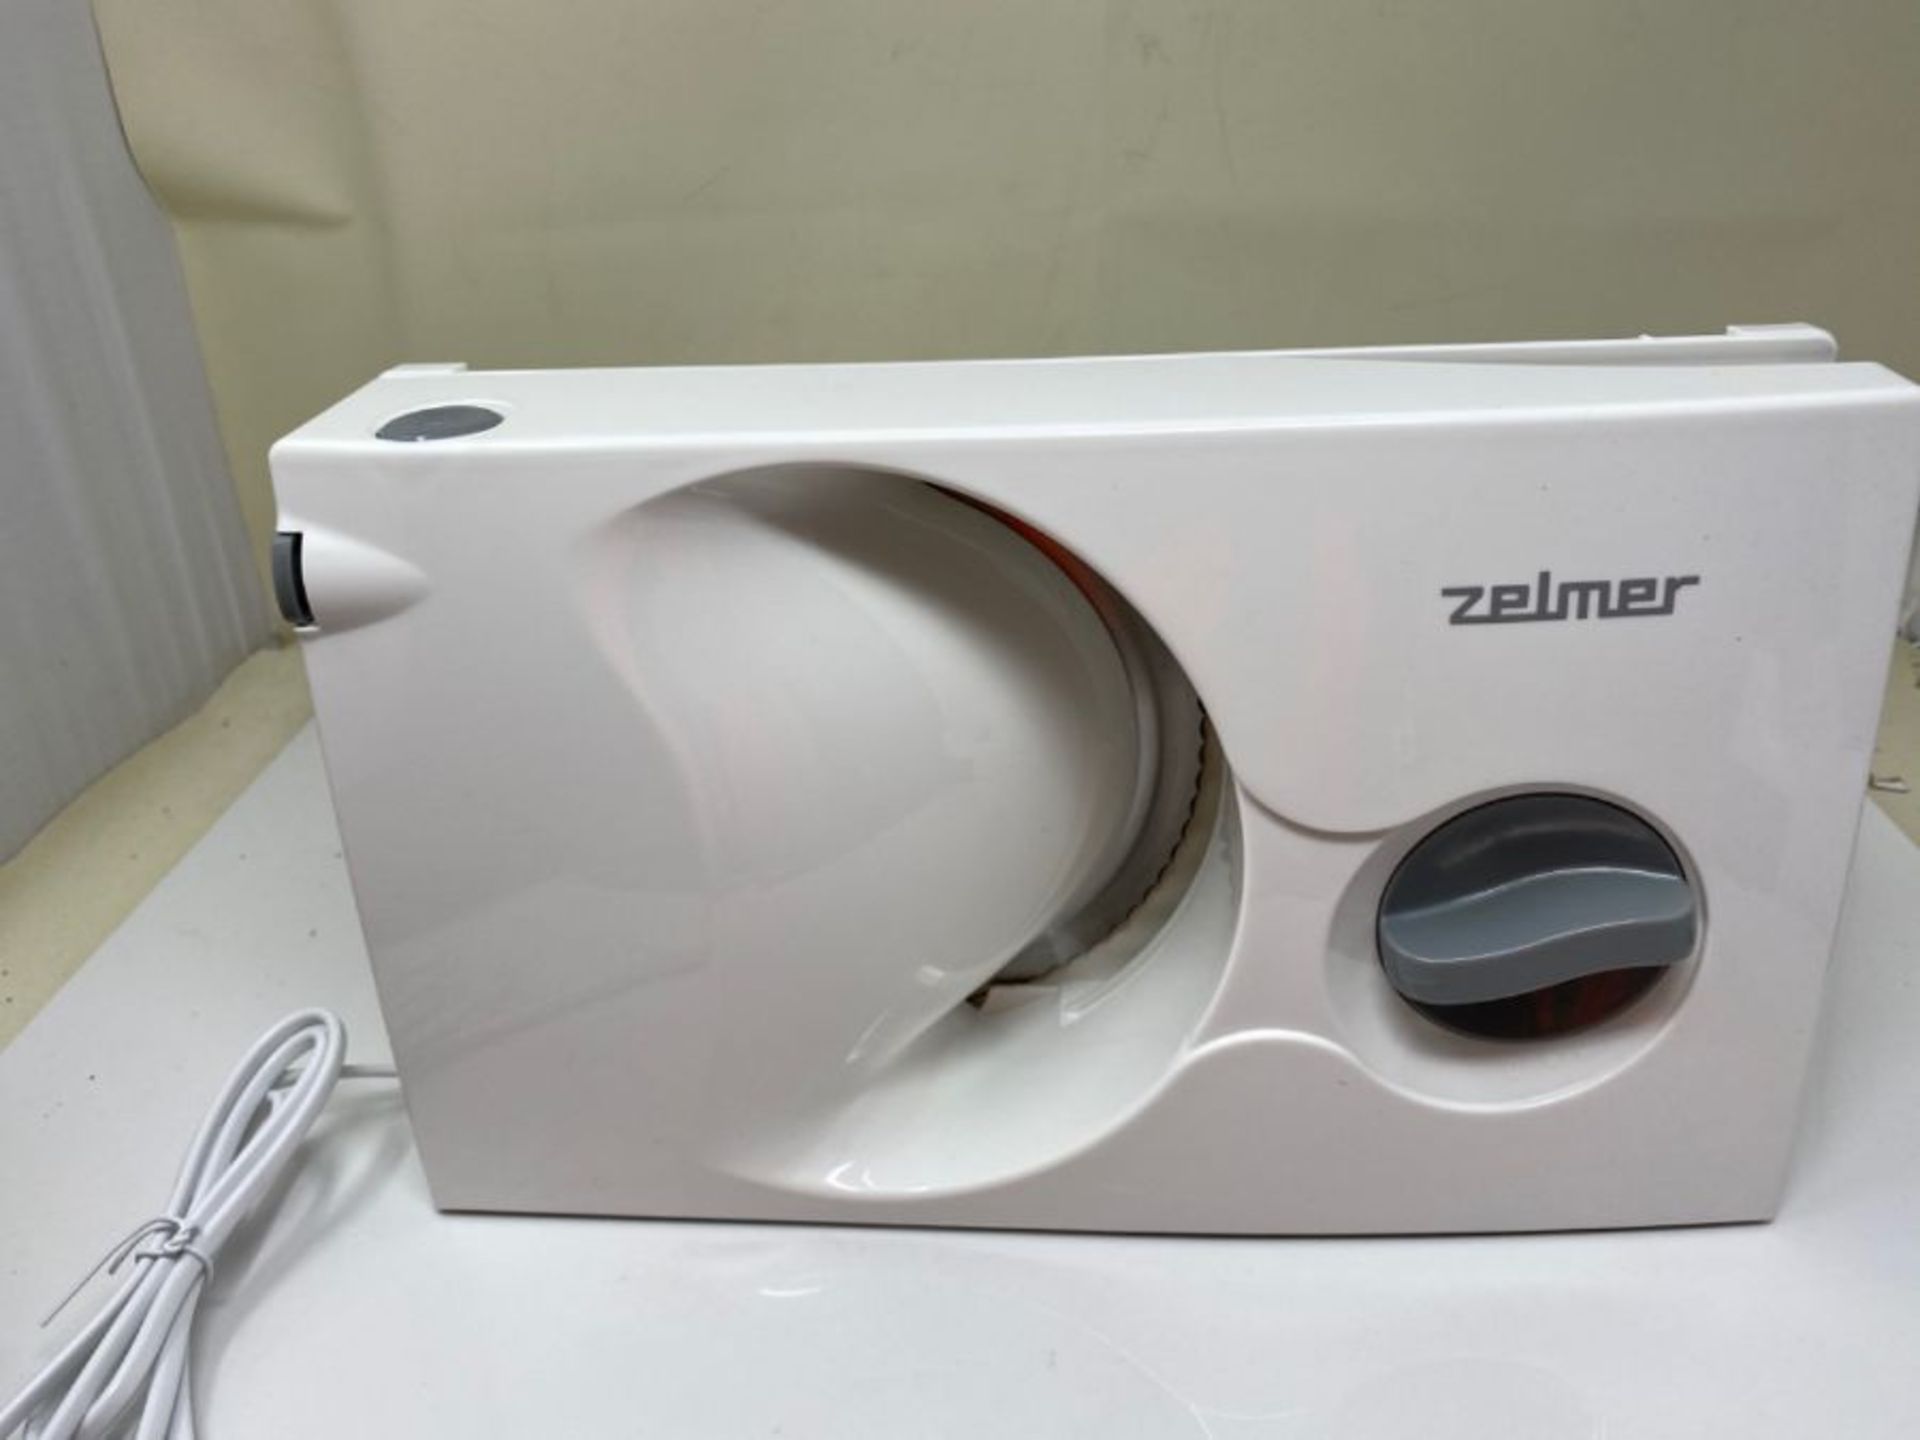 Zelmer ZFS0916 All-Purpose Slicer, Adjustable Cutting Thickness (0-15 mm), 150 W Power - Image 3 of 3